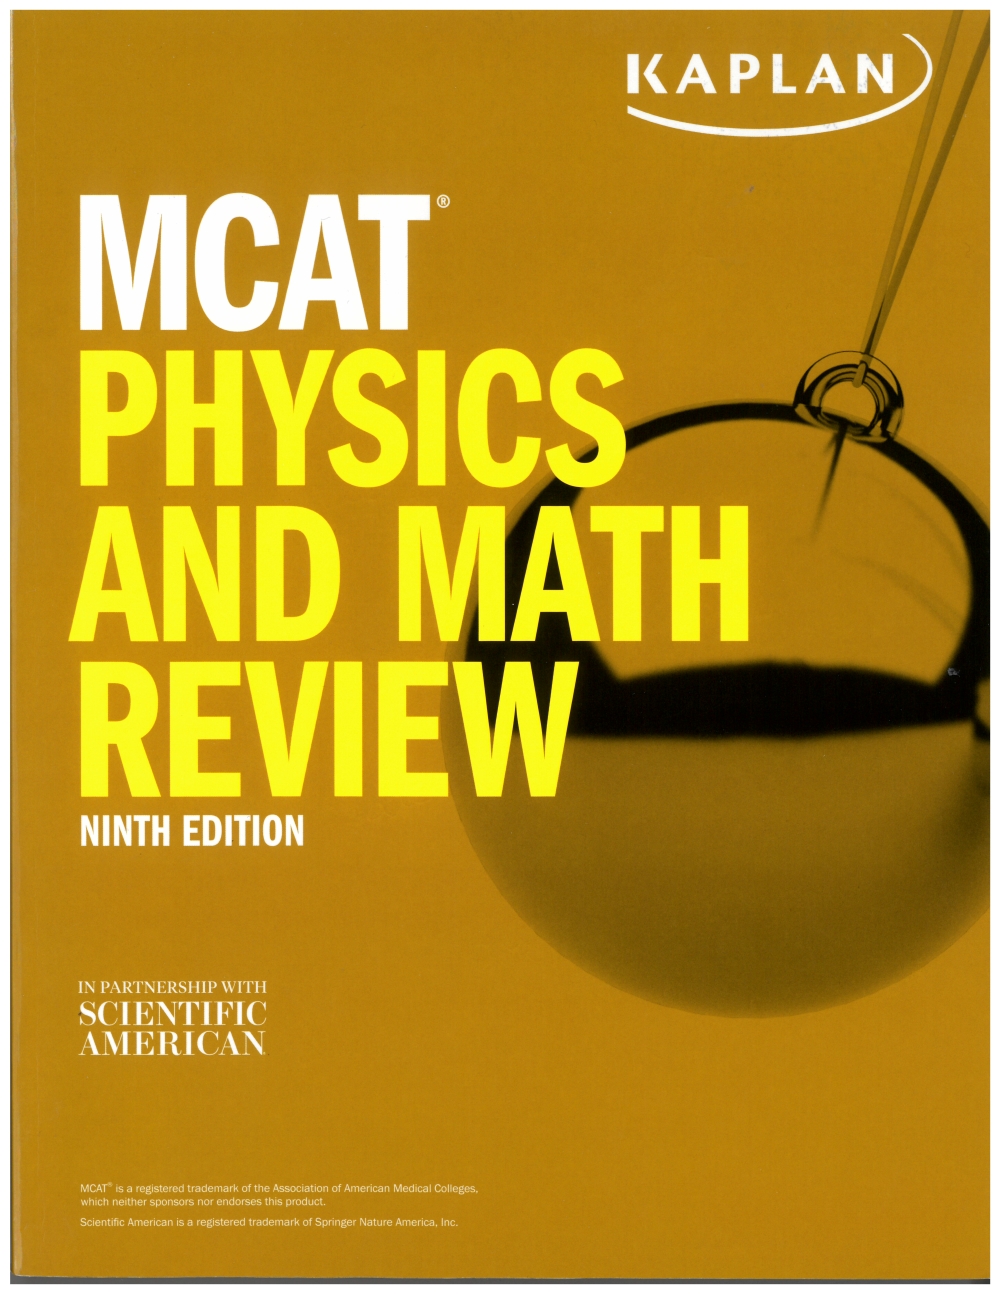 MCAT Physics and Math Review 9th Edition